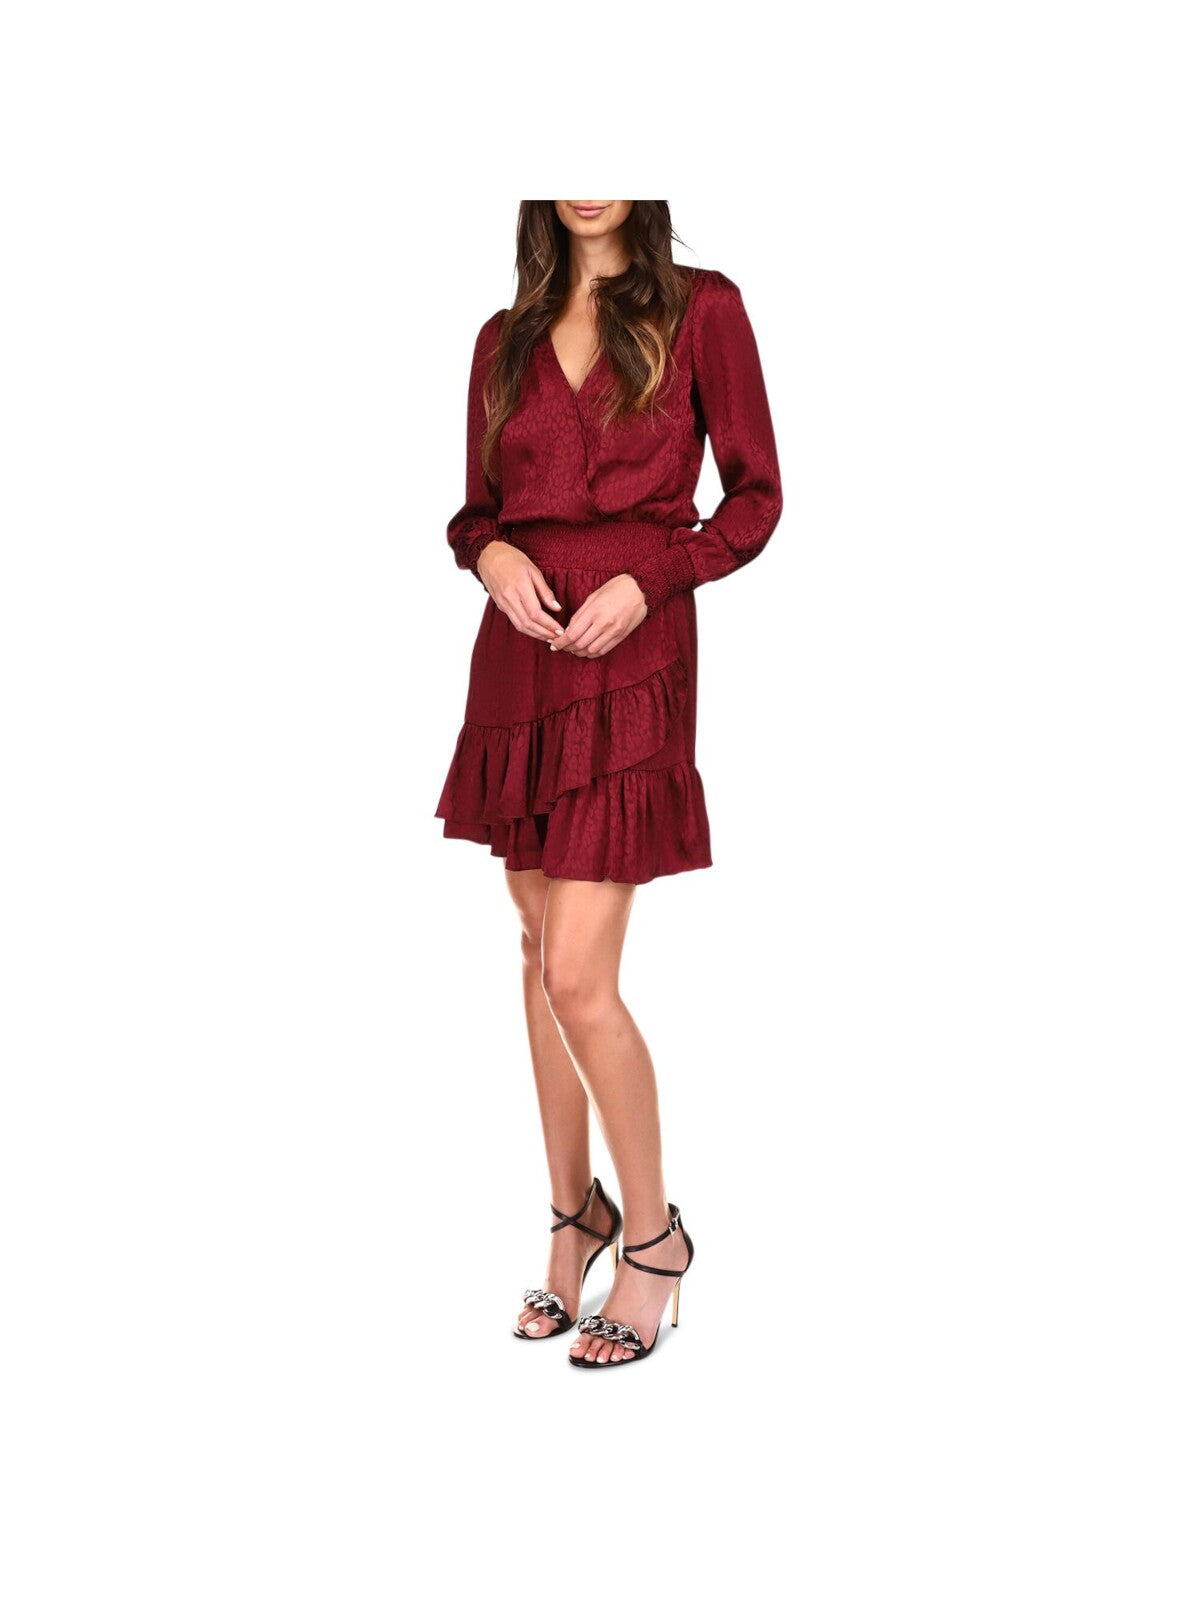 MICHAEL MICHAEL KORS Womens Burgundy Smocked Ruffled Cuffed Pull-on Style Long Sleeve V Neck Above The Knee Cocktail Faux Wrap Dress XL